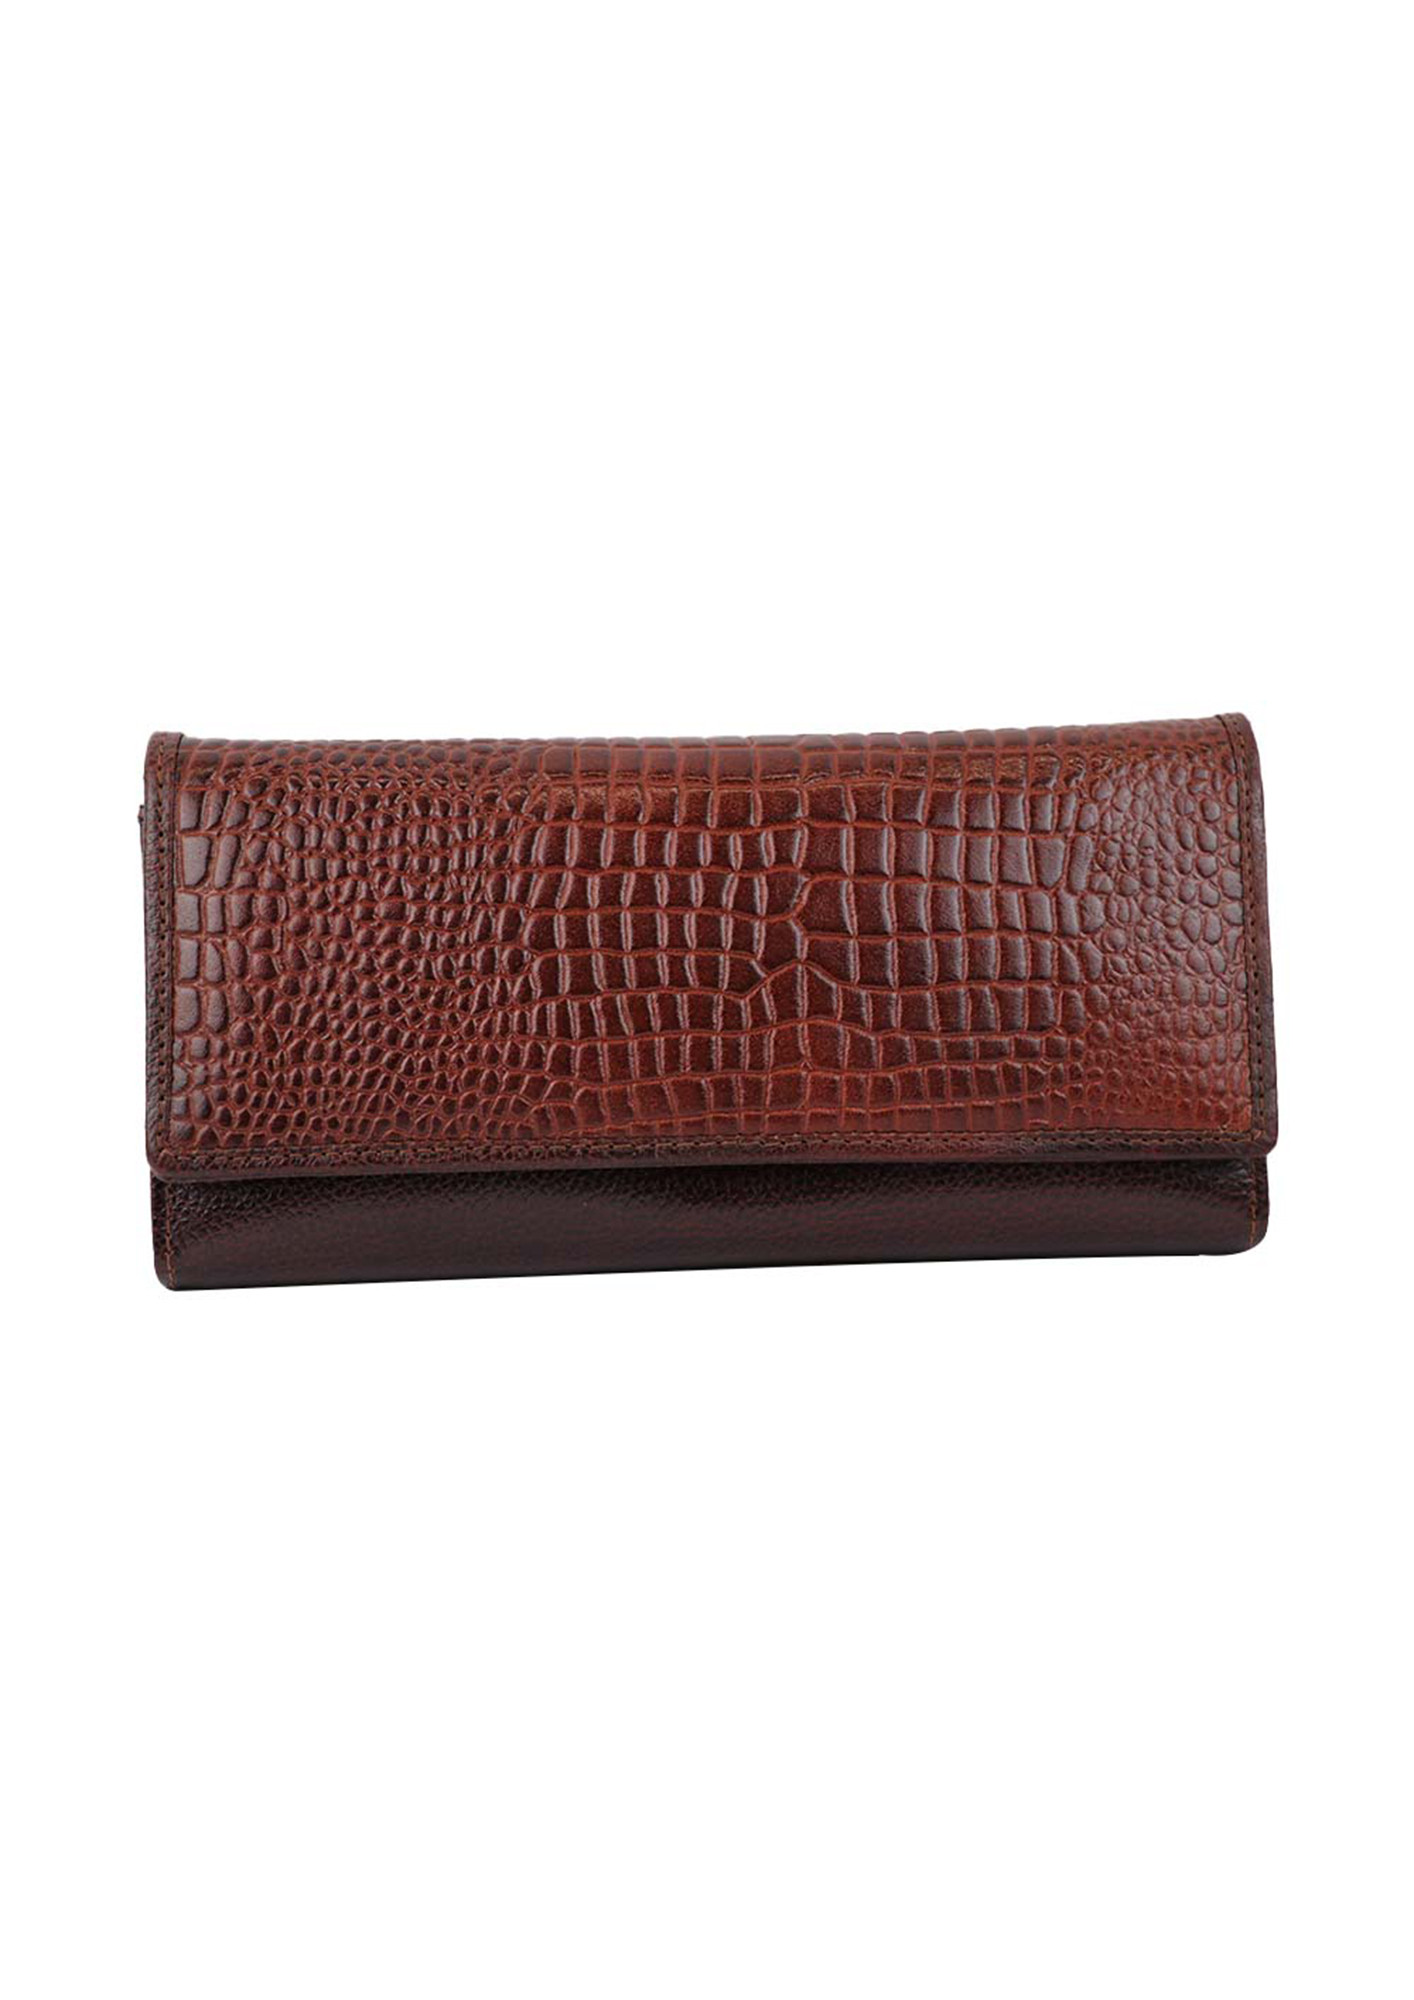 Buy or send Leatherano Brown Color Modern Type Stylish Purse Online